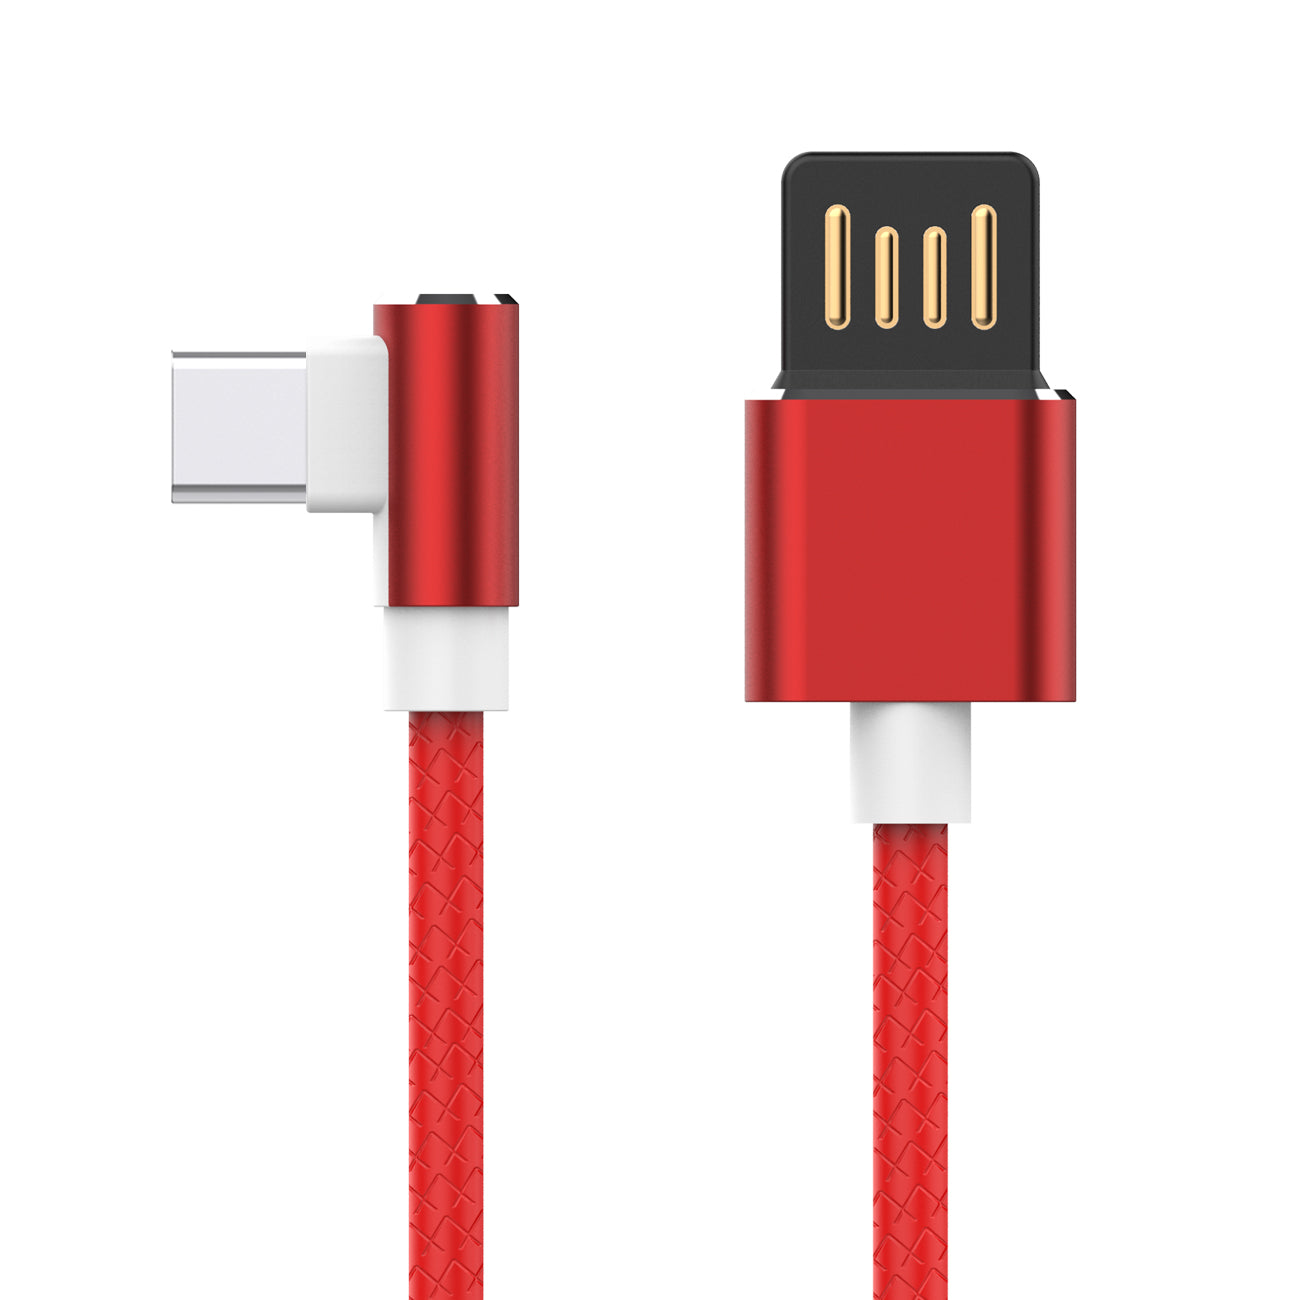 Cable USB To Type C Premium Full Steel Moisture 2.6A Red Color